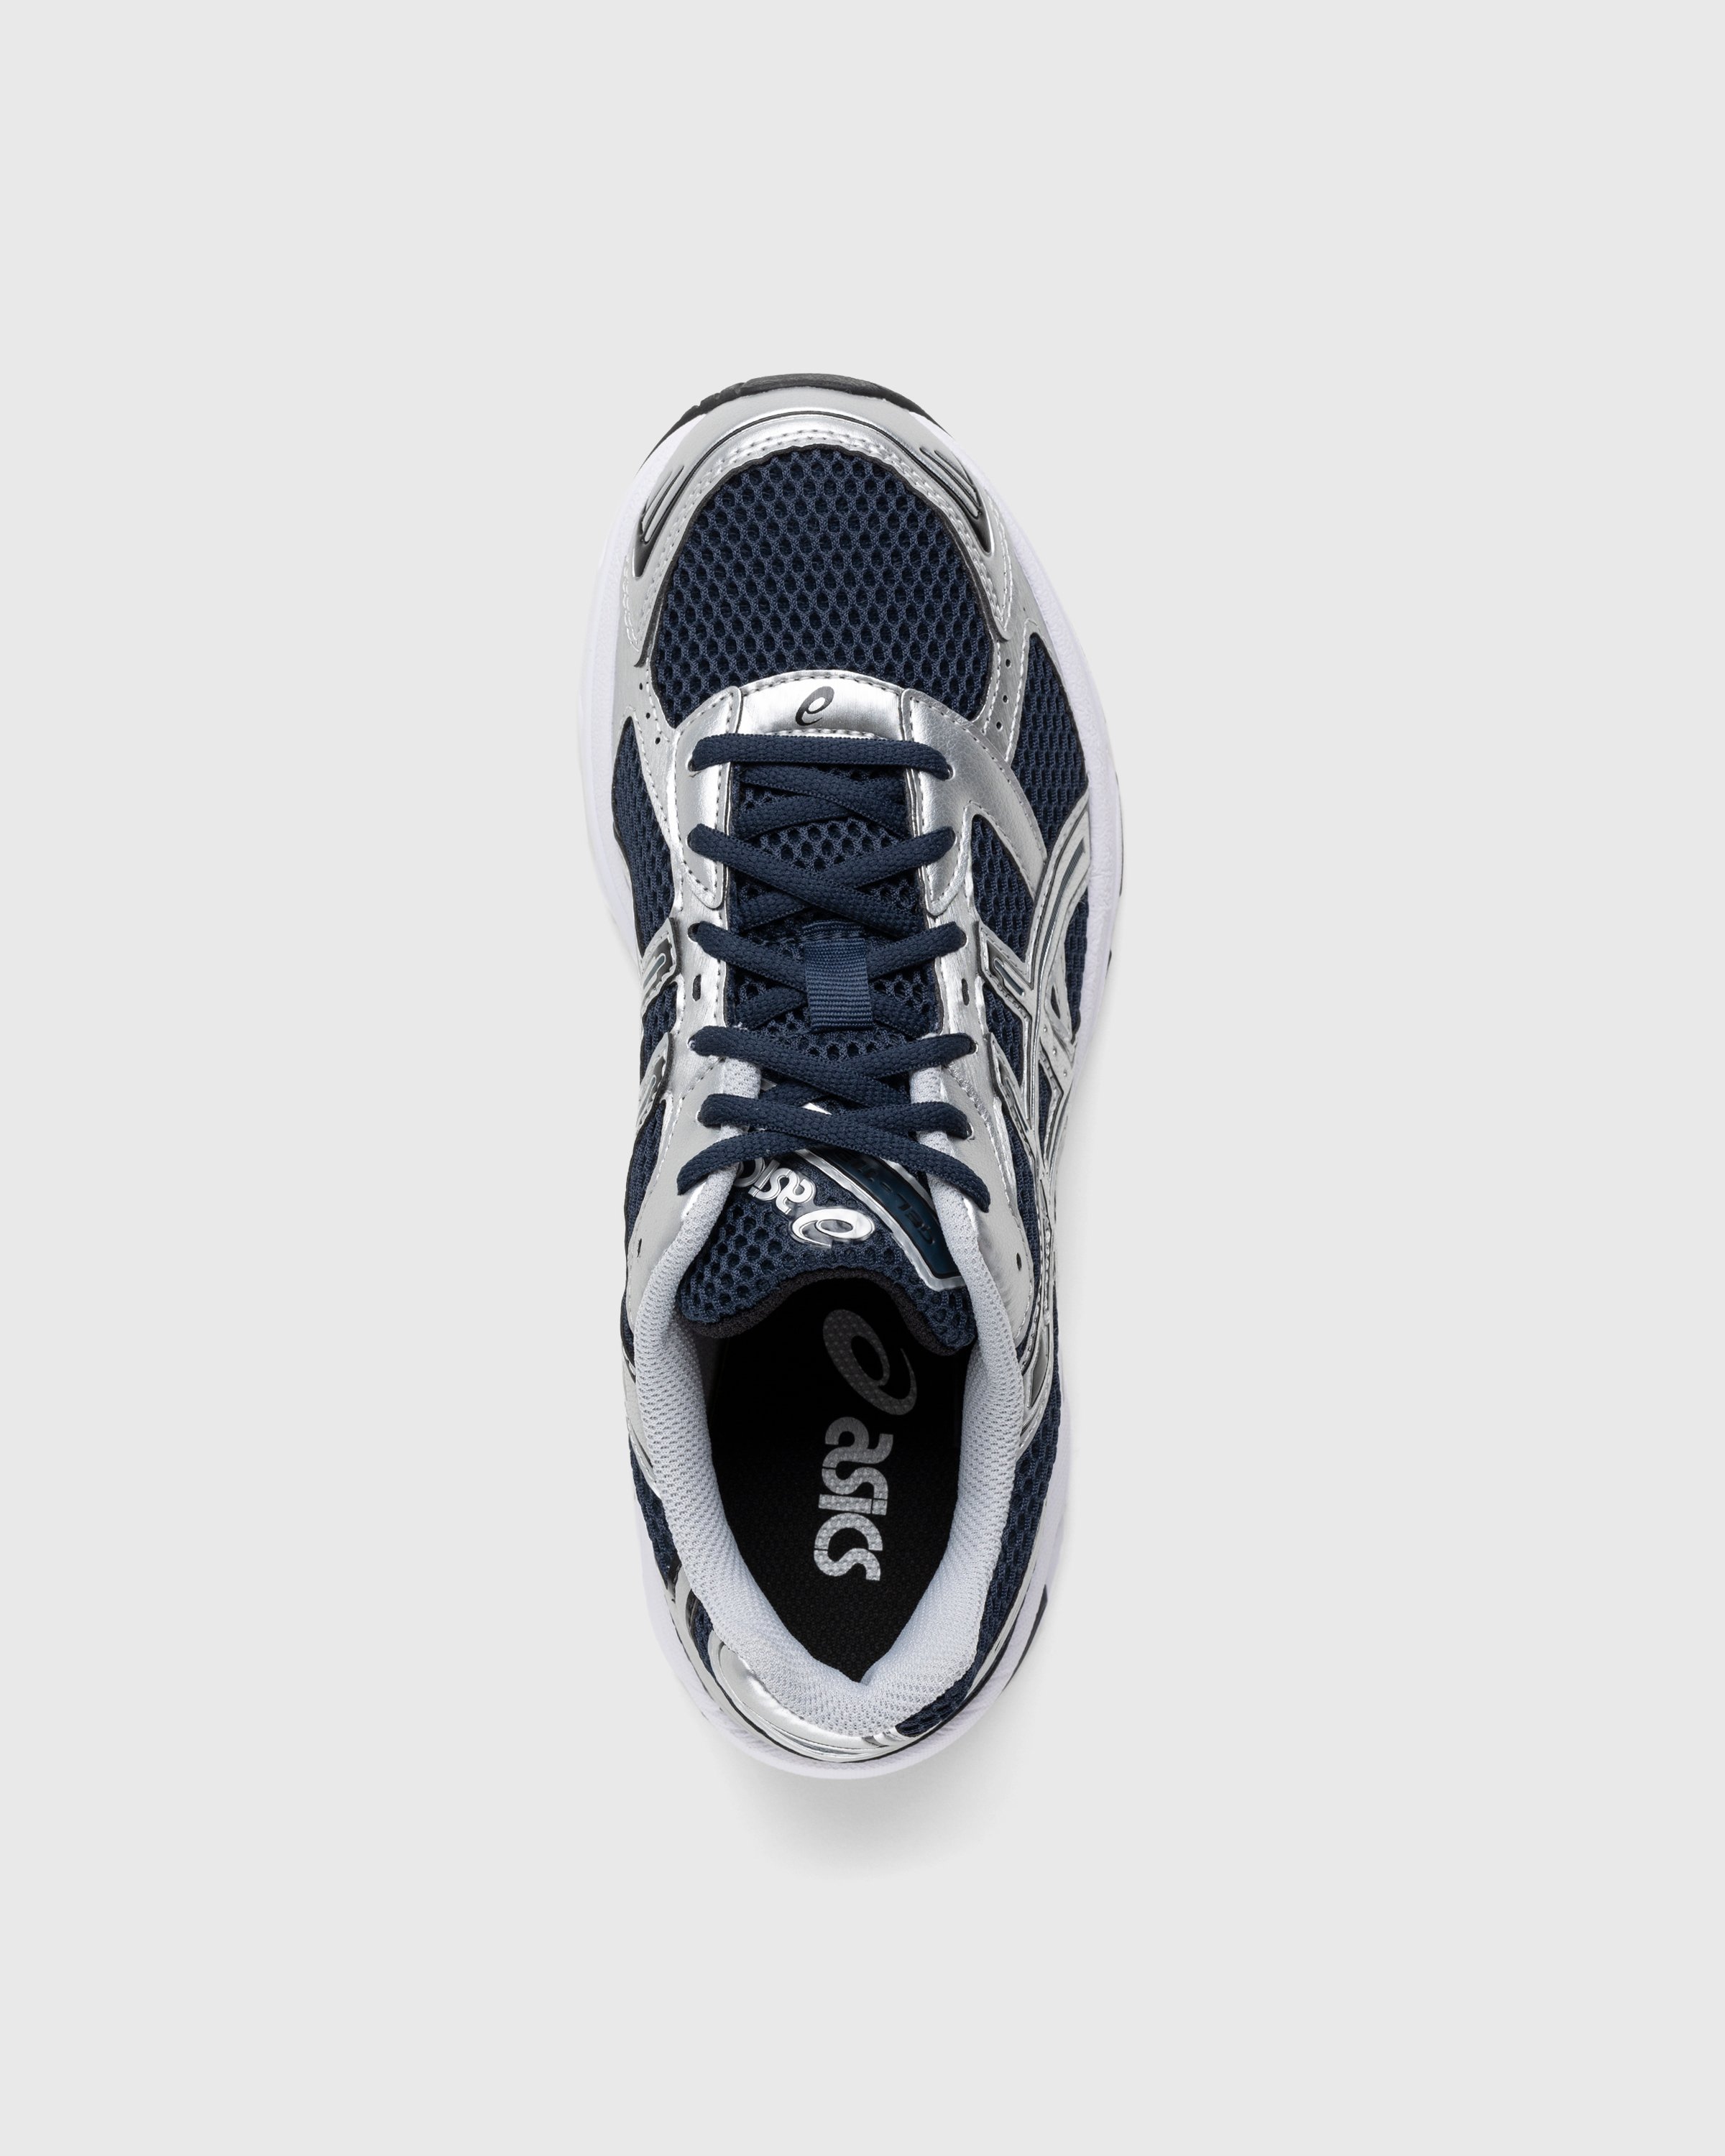 asics - GEL-1130 French Blue/Pure Silver - Footwear - Blue - Image 5